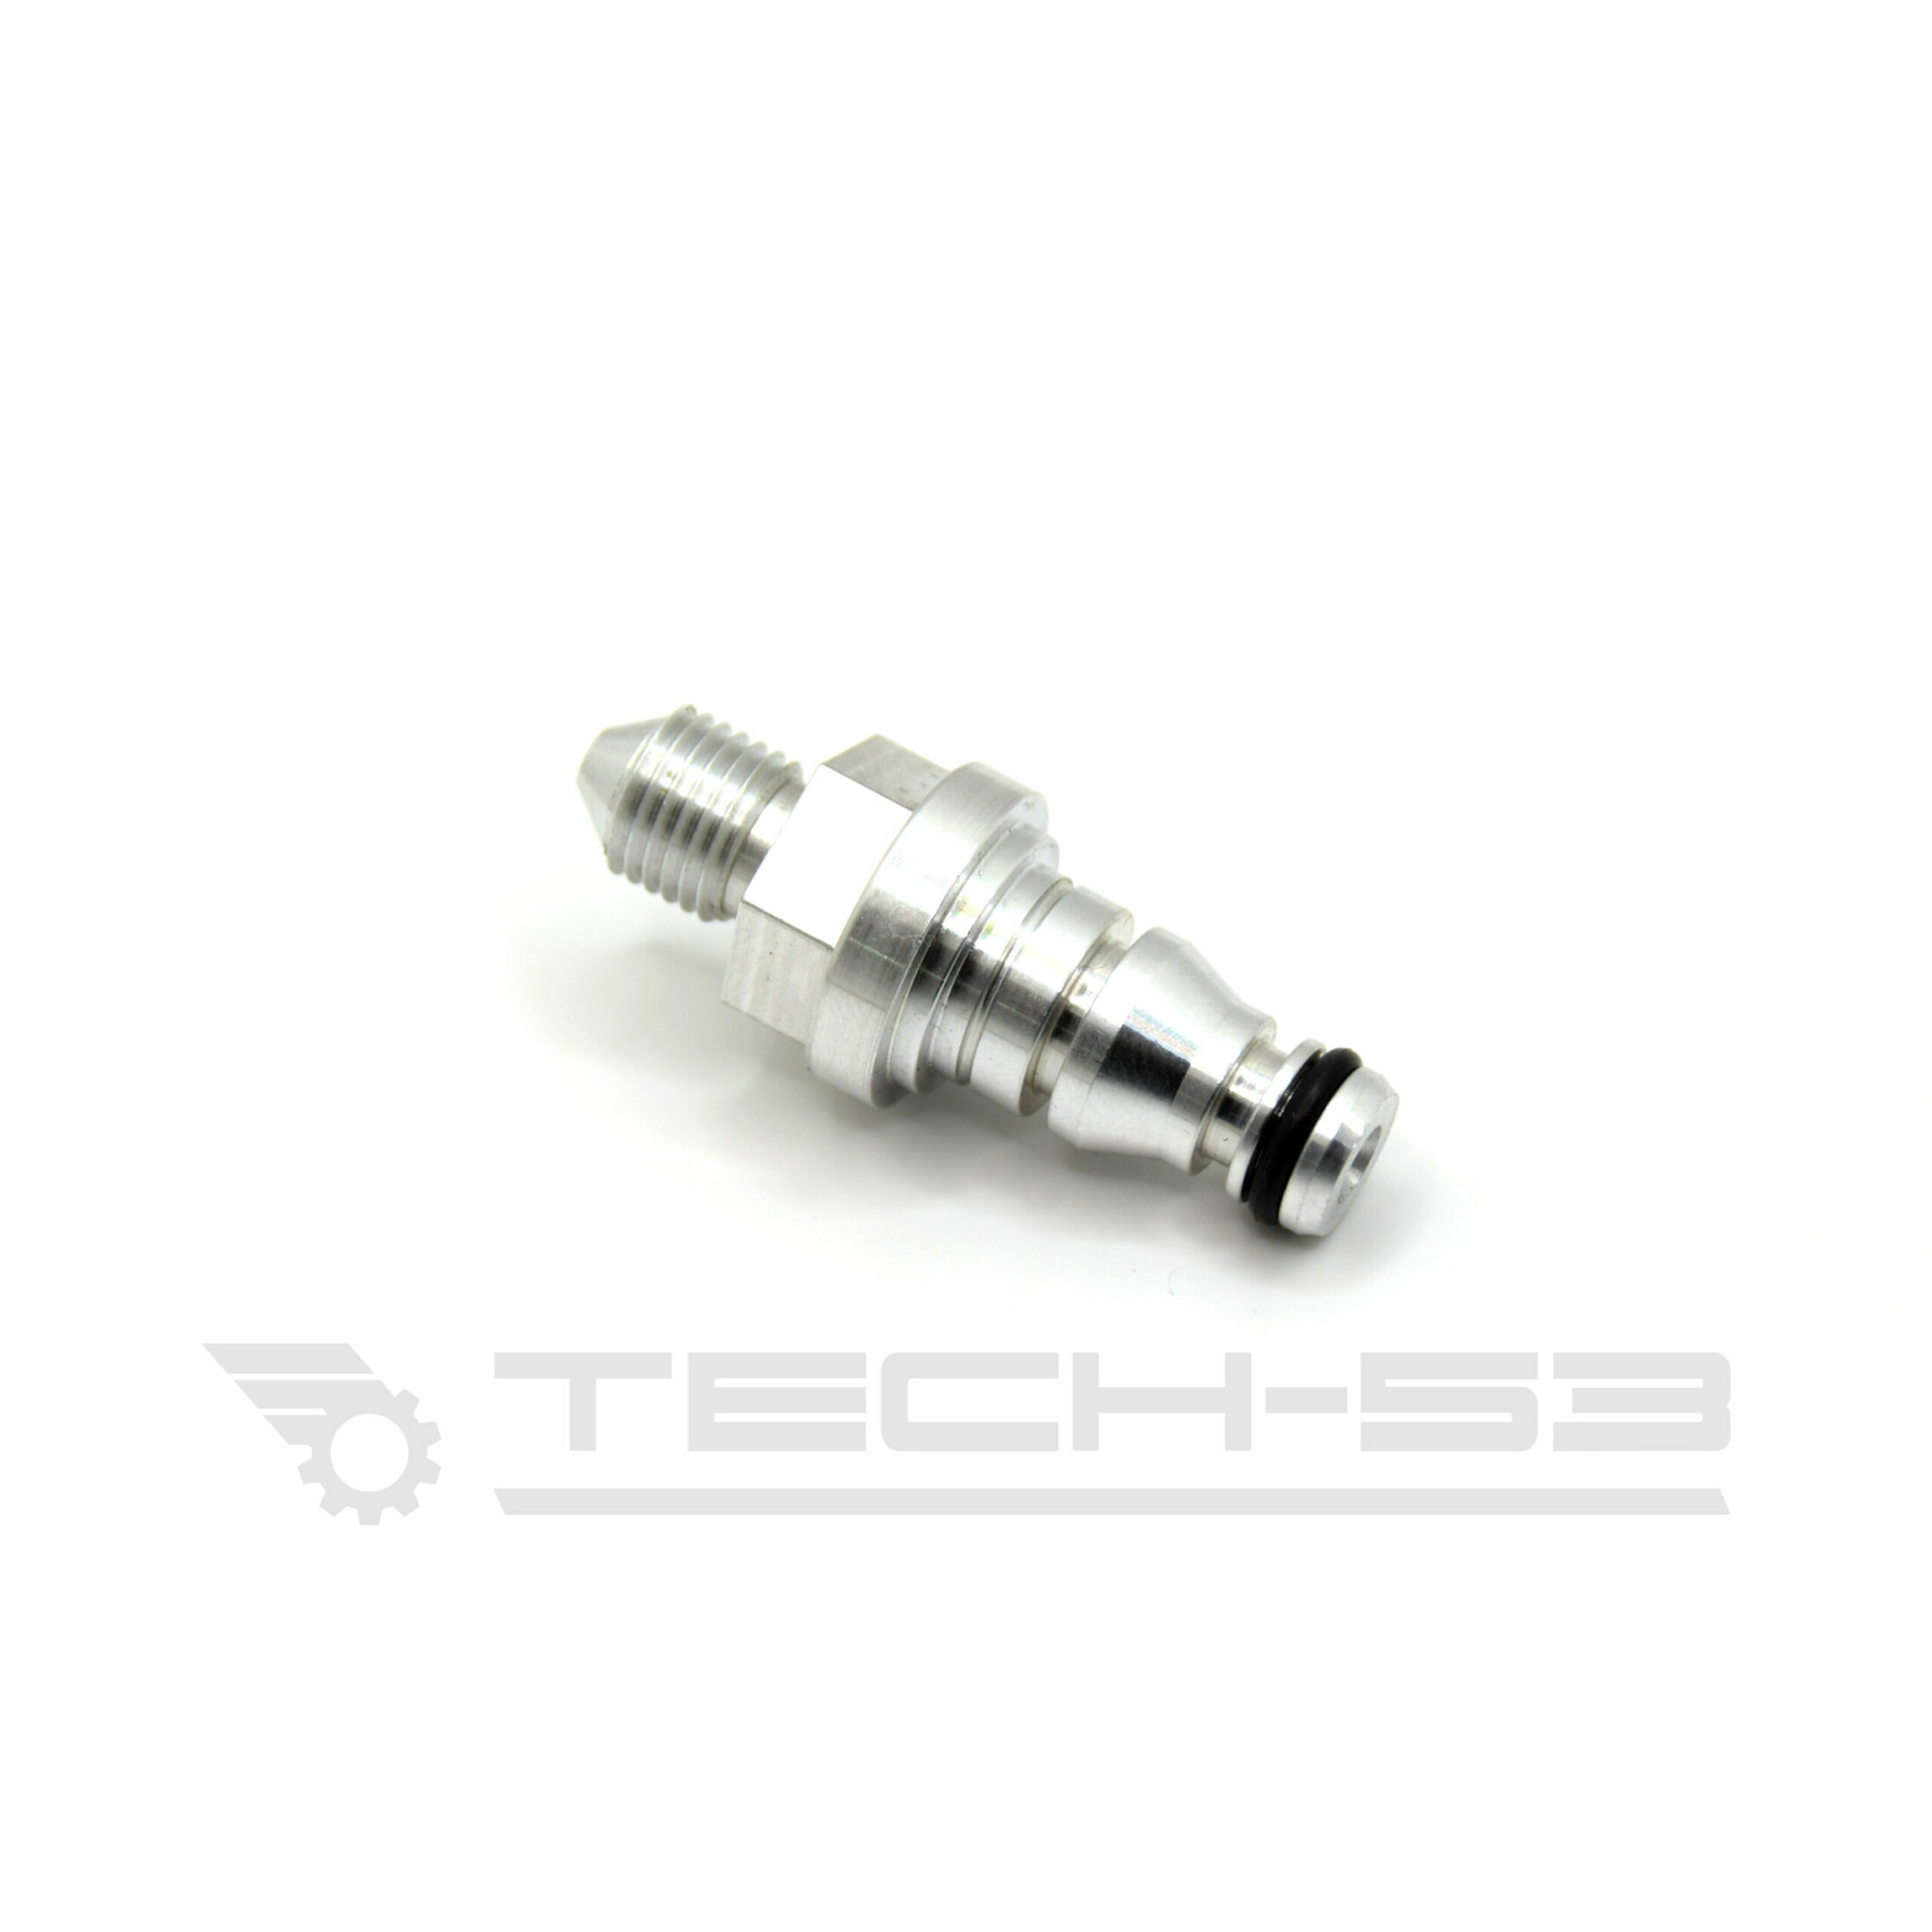 CLUTCH FITTING JIC -3 ADAPTER TO STAINLESS STEEL LINE CLIP-ON STYLE FORD GM BMW VW MASTER CYLINDER SLAVE